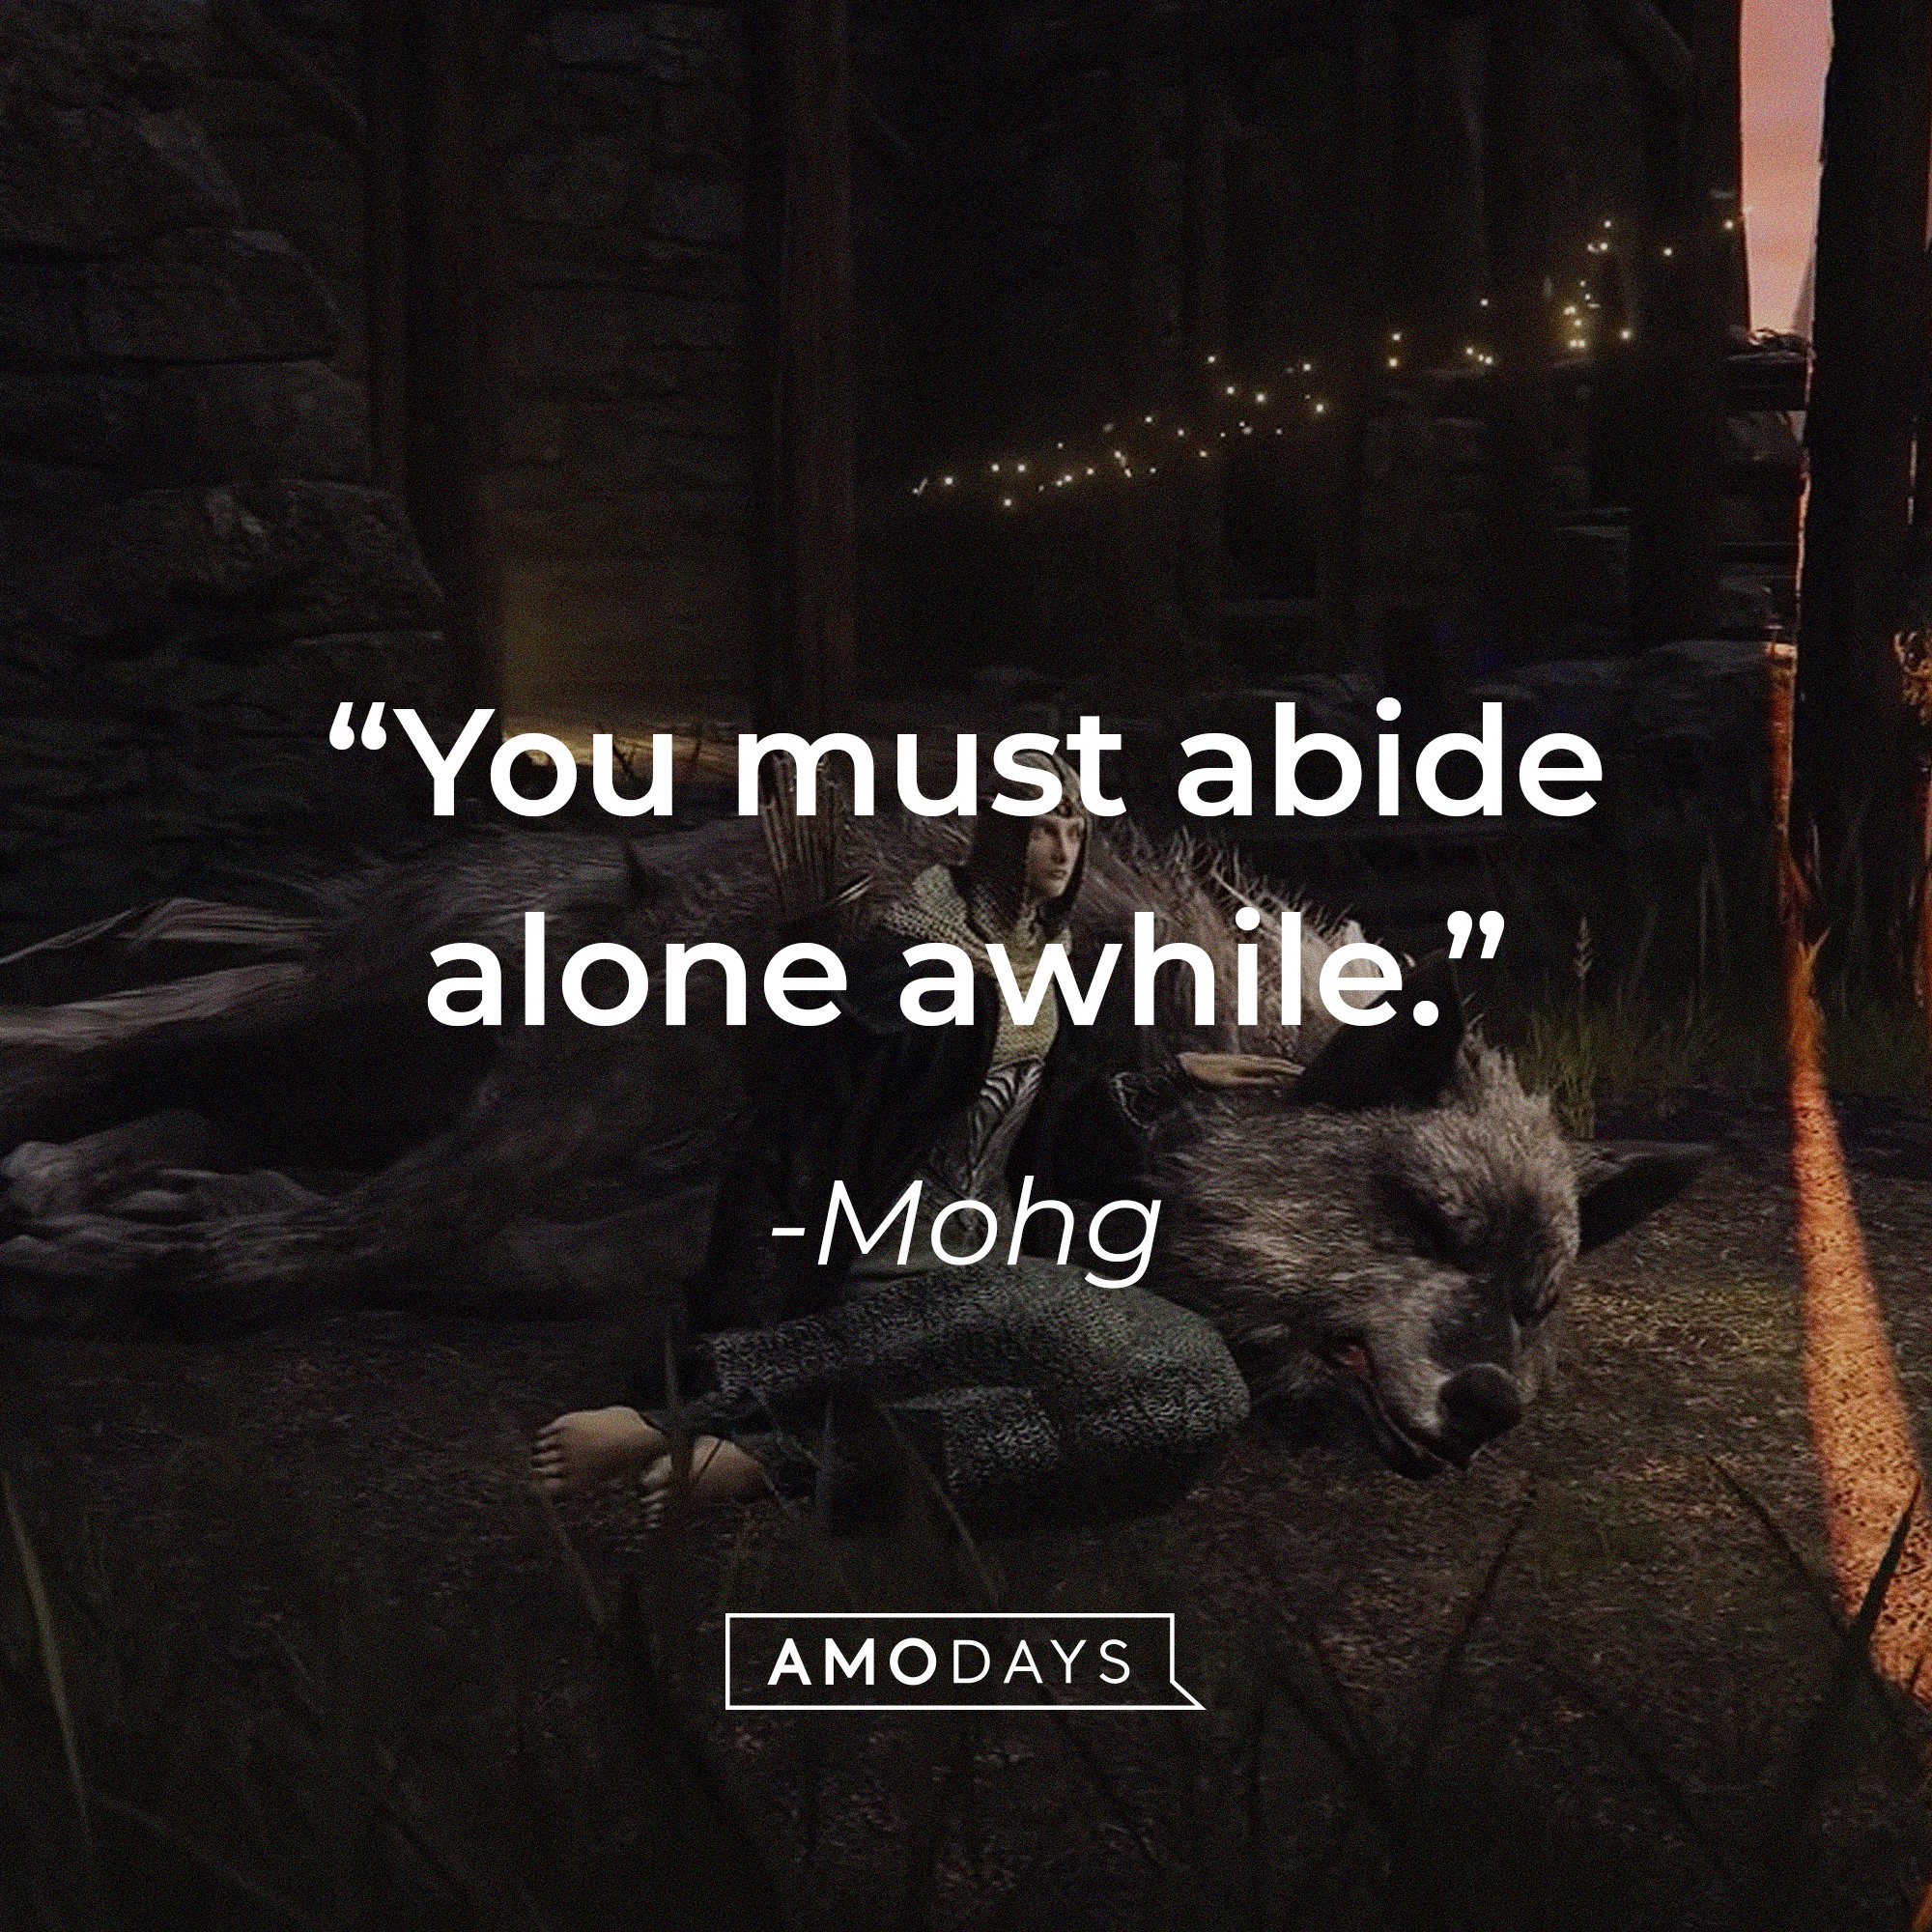  Mohg’s quote: "You must abide alone awhile." | Image: AmoDays